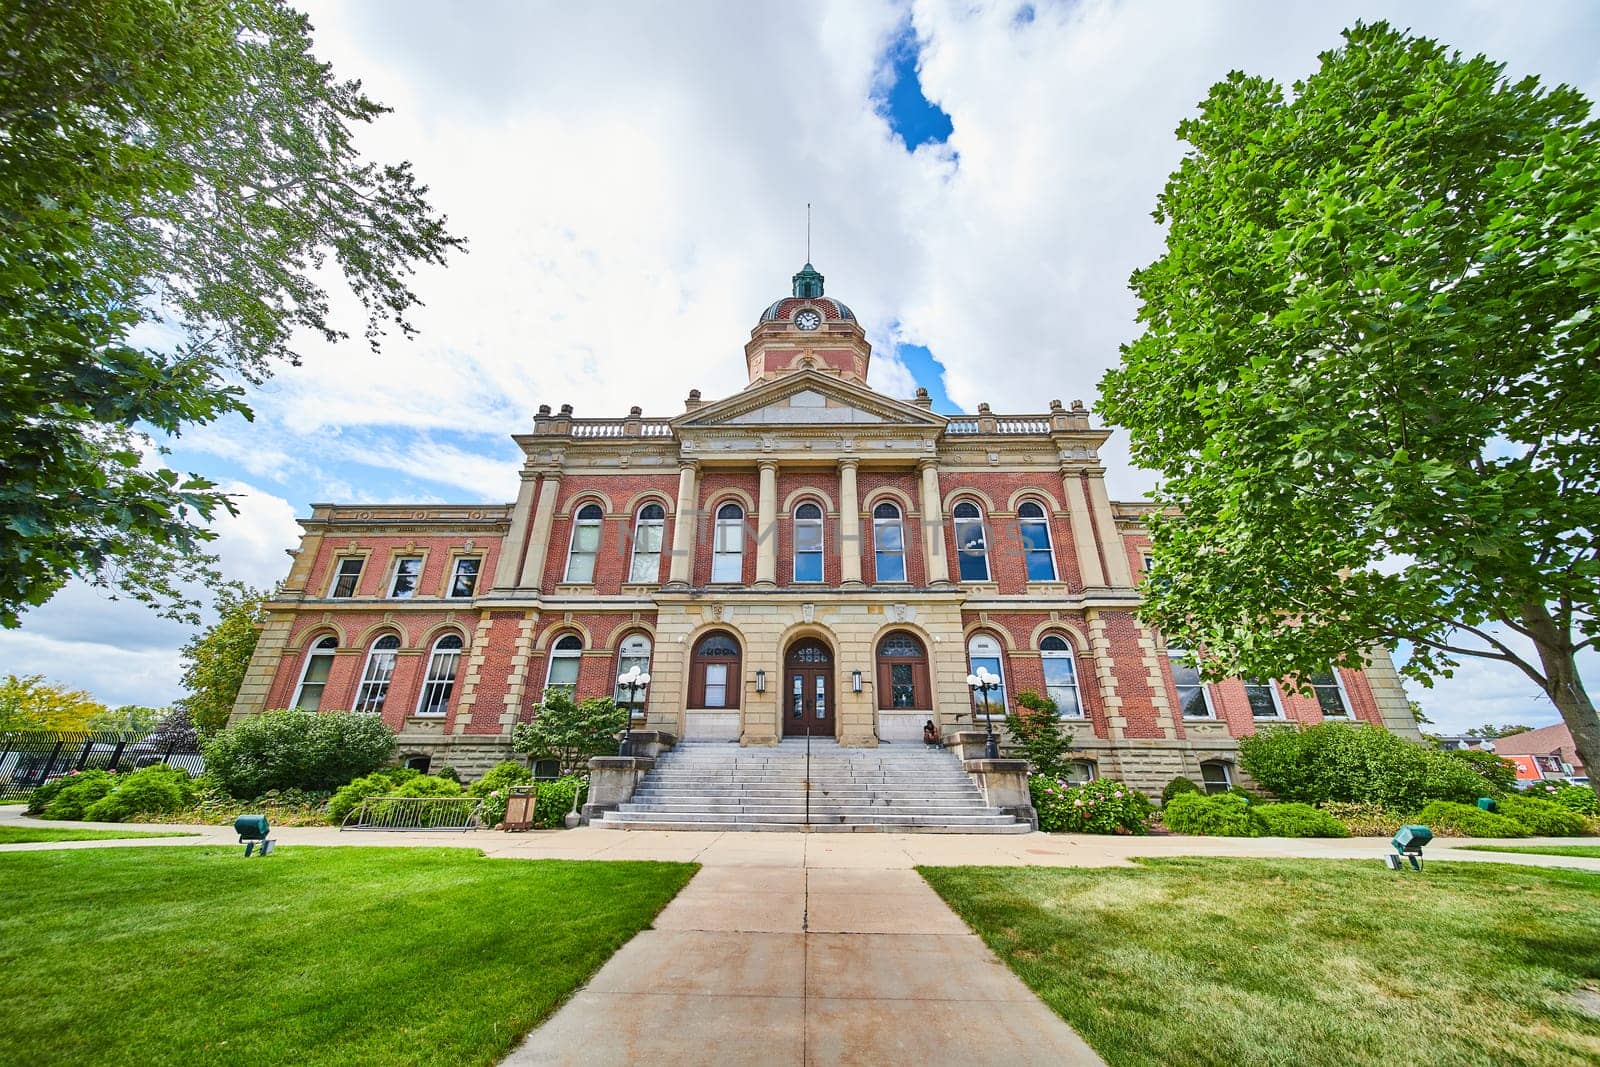 Elkhart County courthouse on sunny summer day, front entrance law and order, Indiana by njproductions